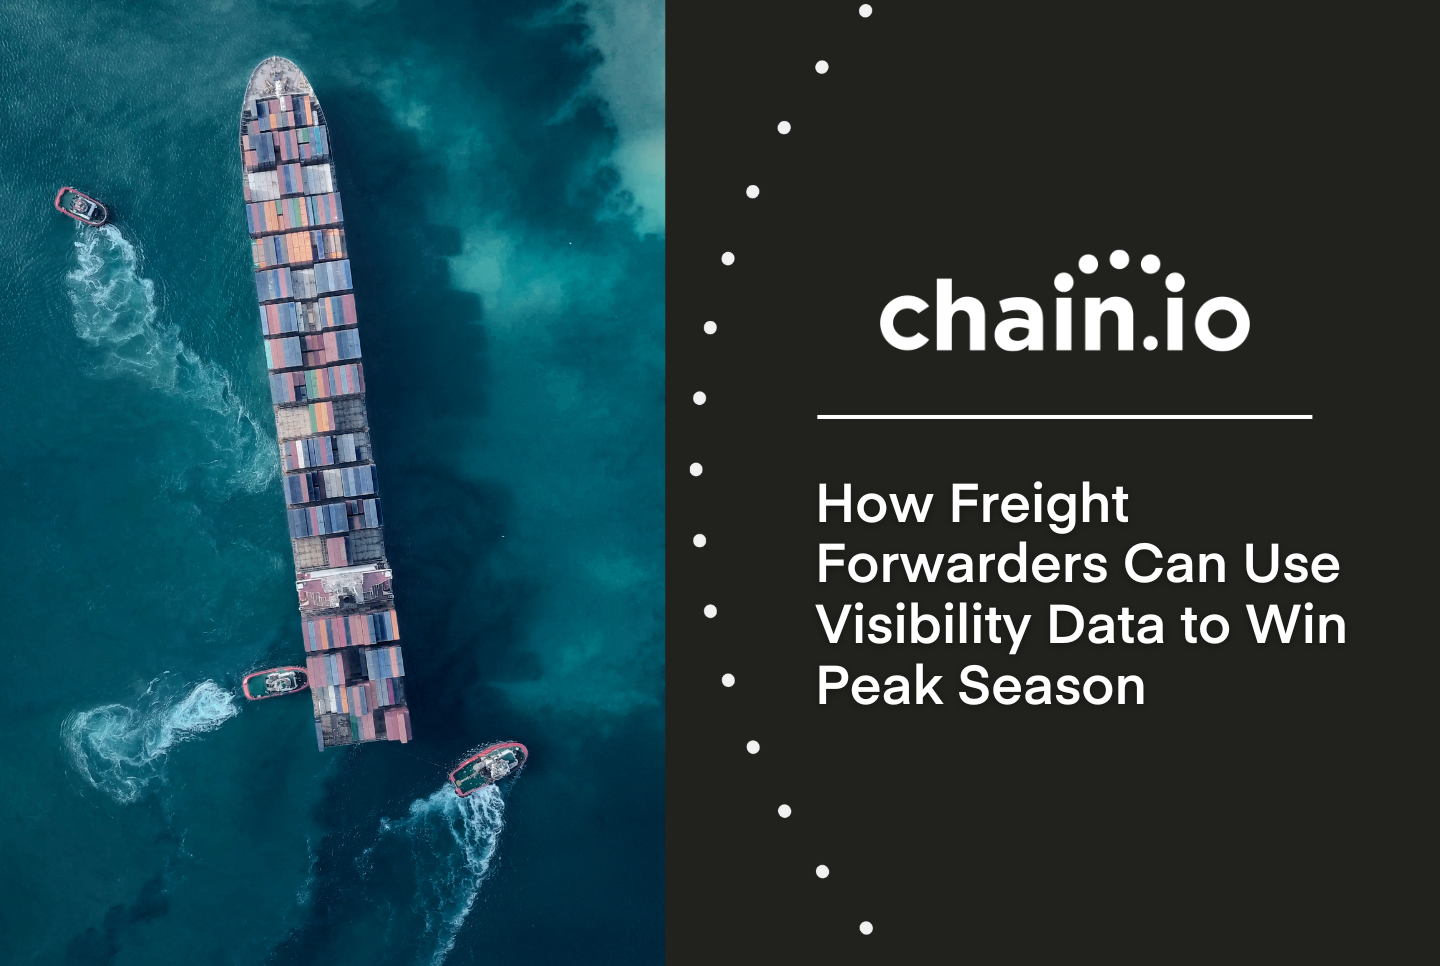 How freight forwarders can use visibility data to win peak season